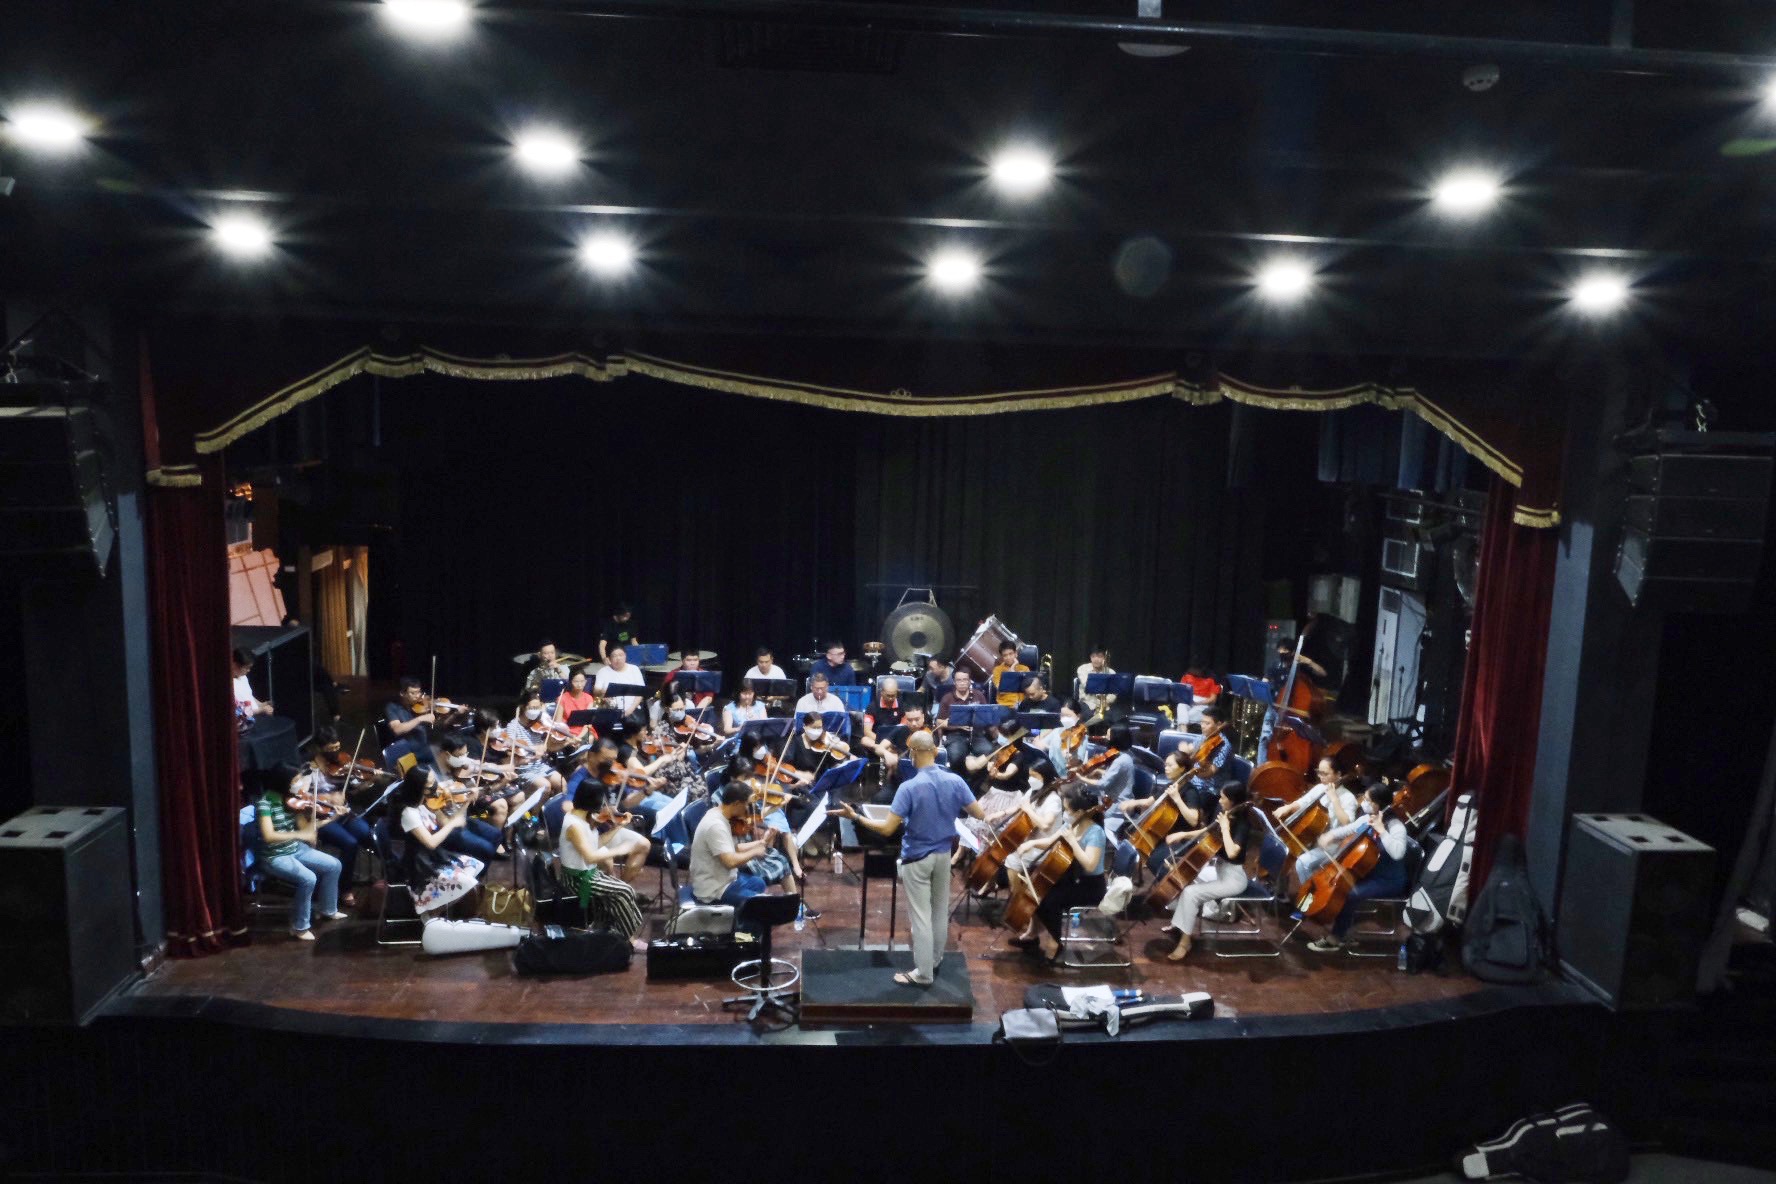 Vietnam's top Opera vocalists gather for the first time in a concert - Photo 2.